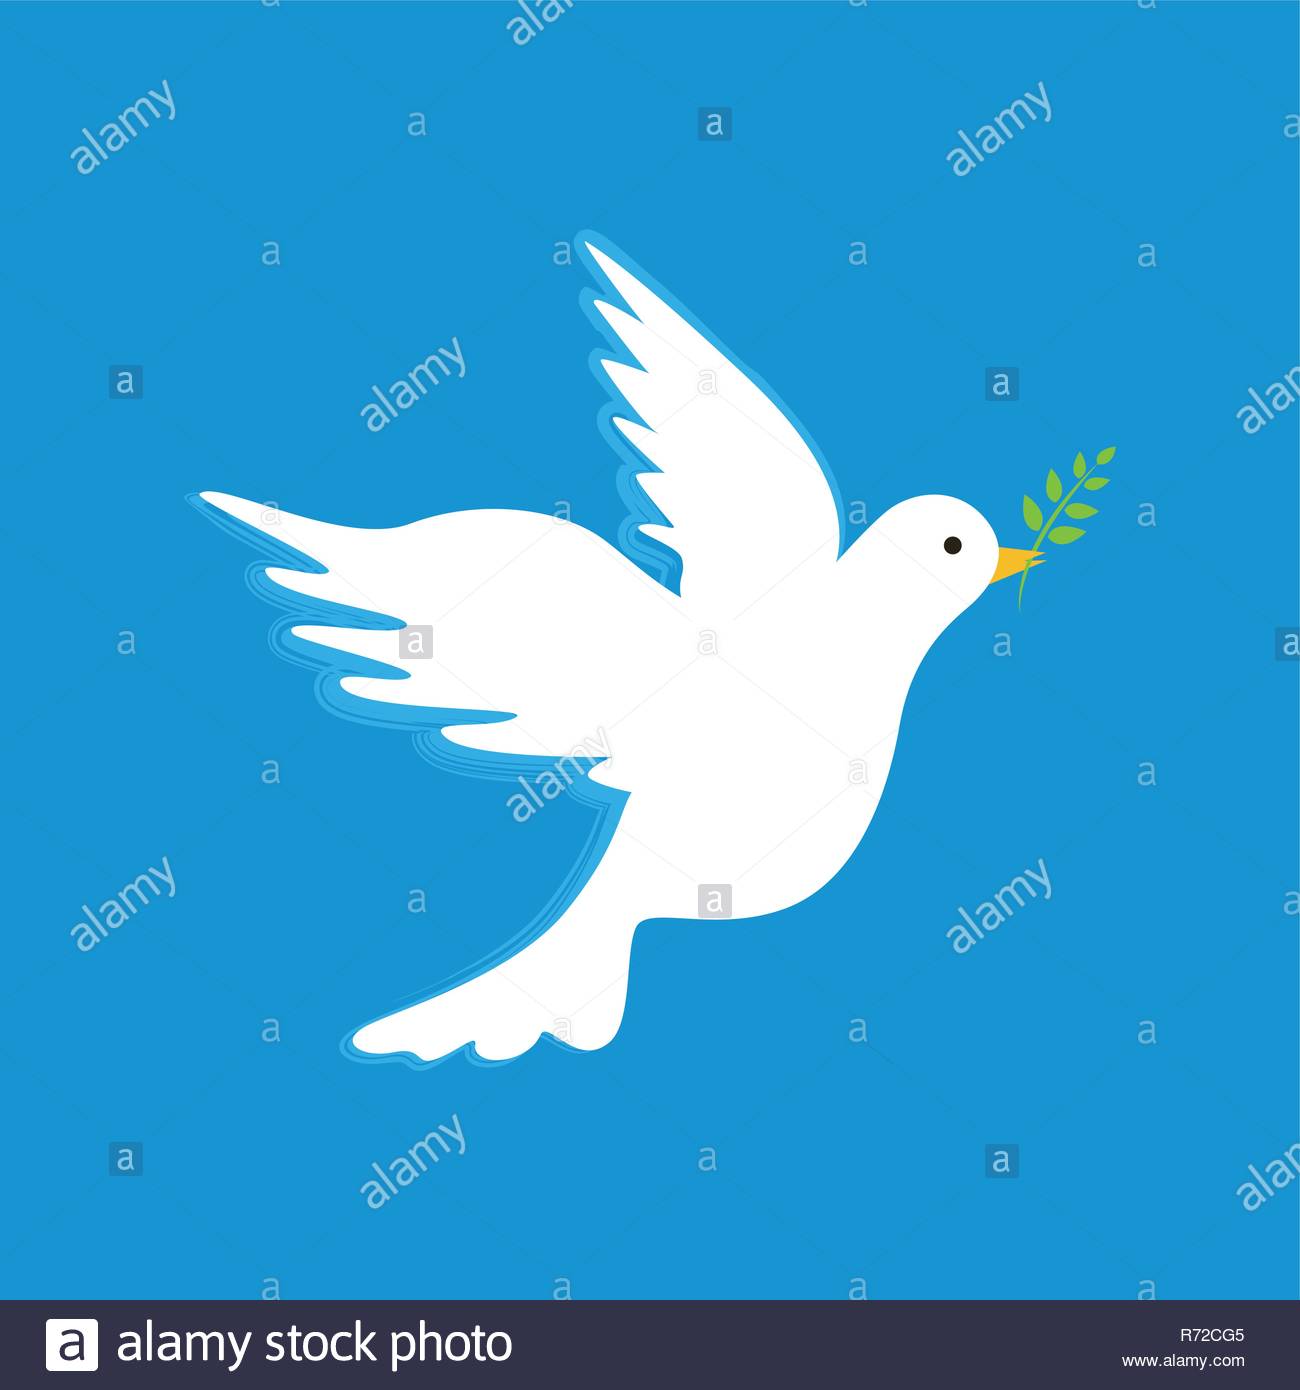 White Peace Dove With Branch On Blue Background Vector